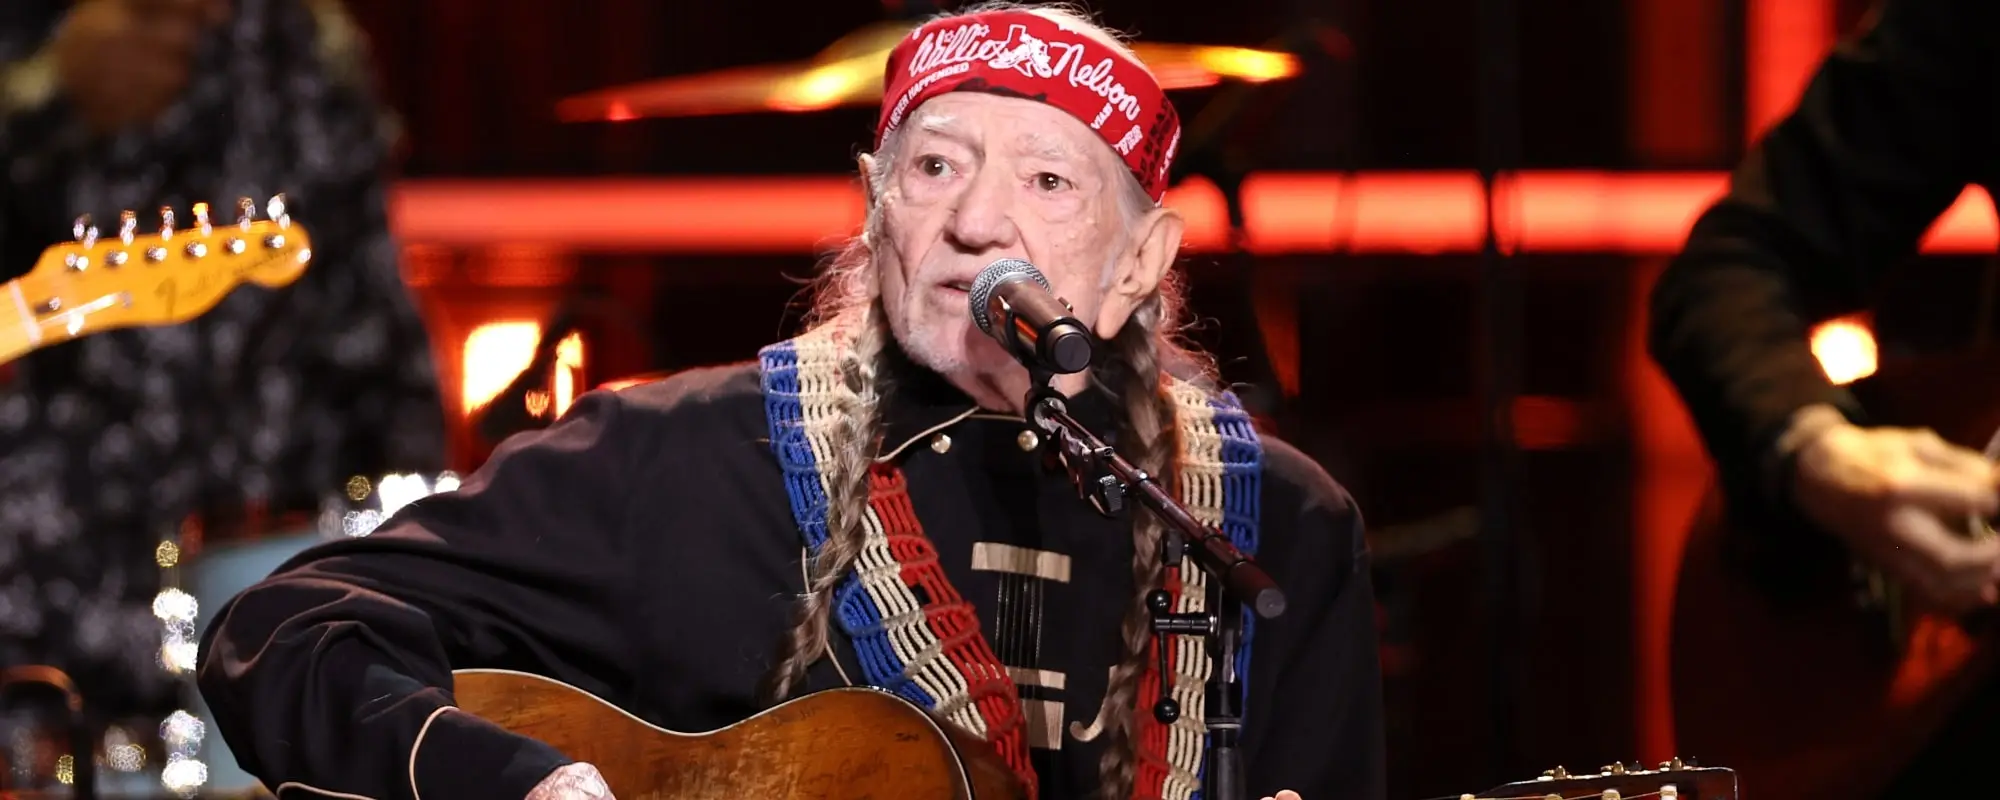 Watch Willie Nelson and Kermit the Frog Perform “Rainbow Connection” at Luck Reunion